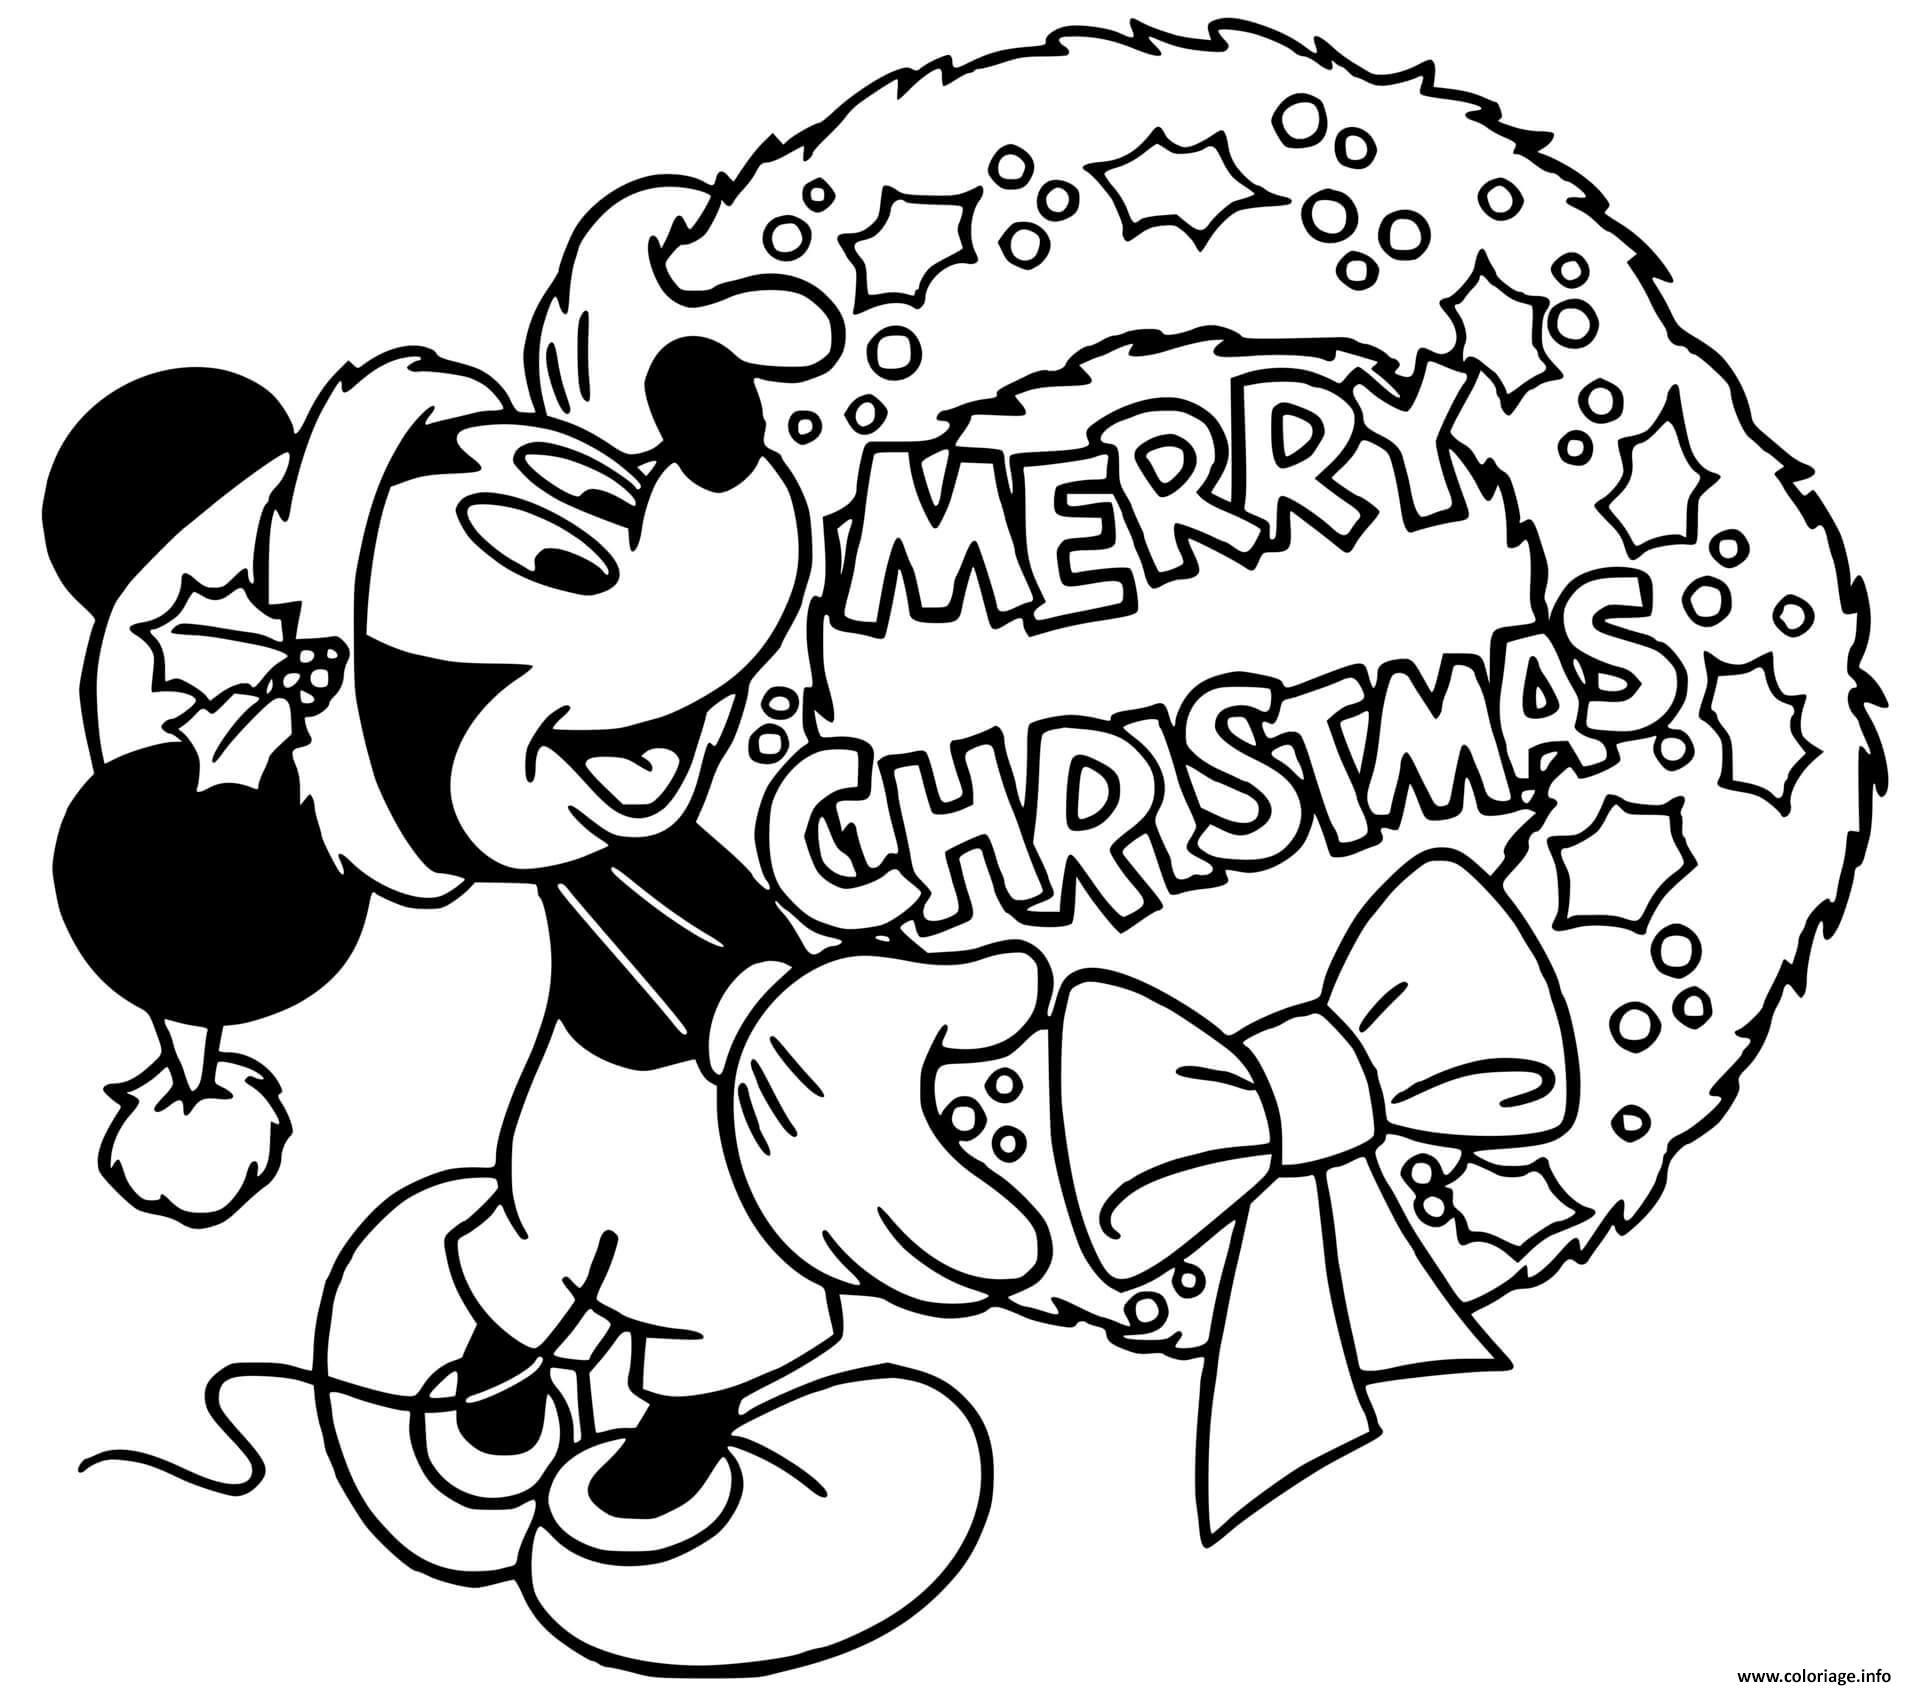 Coloriage Mickey Mouses Wreath Merry Christmas Dessin Noel Disney à